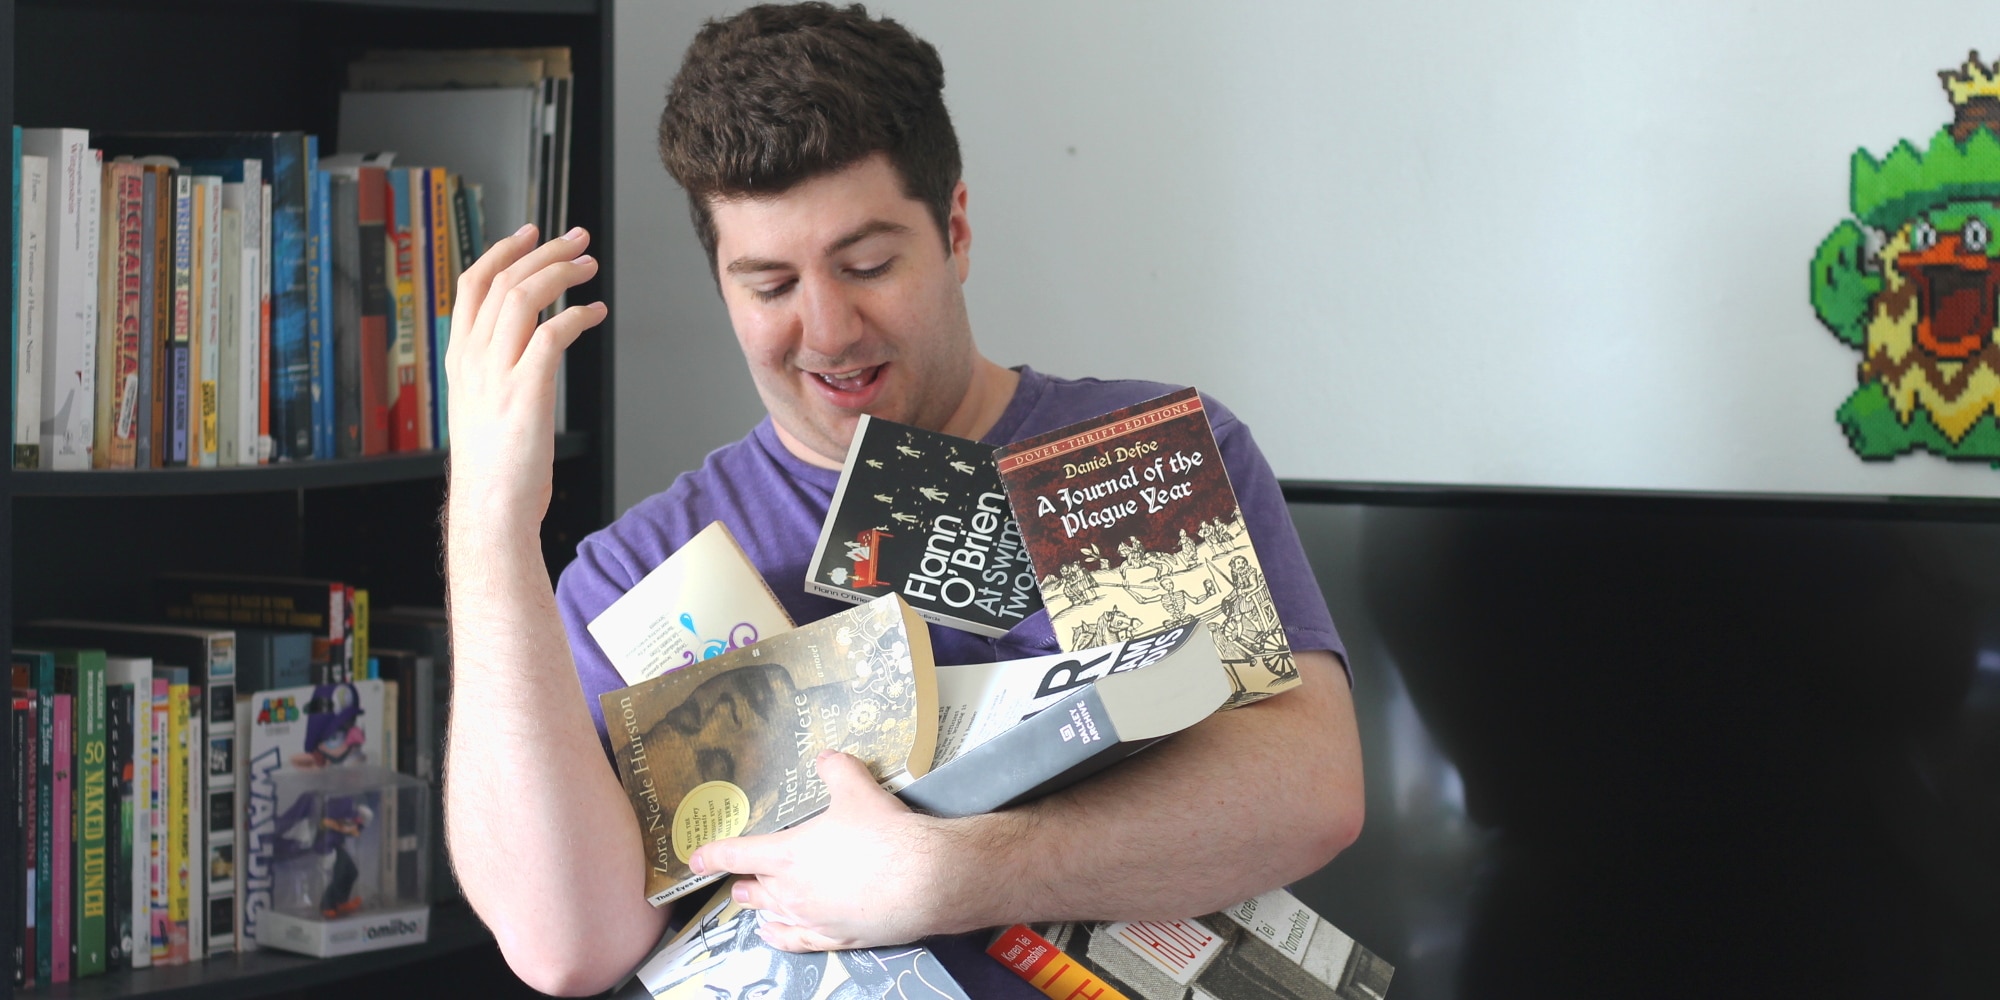 me struggling to hold all the books I'm not reading